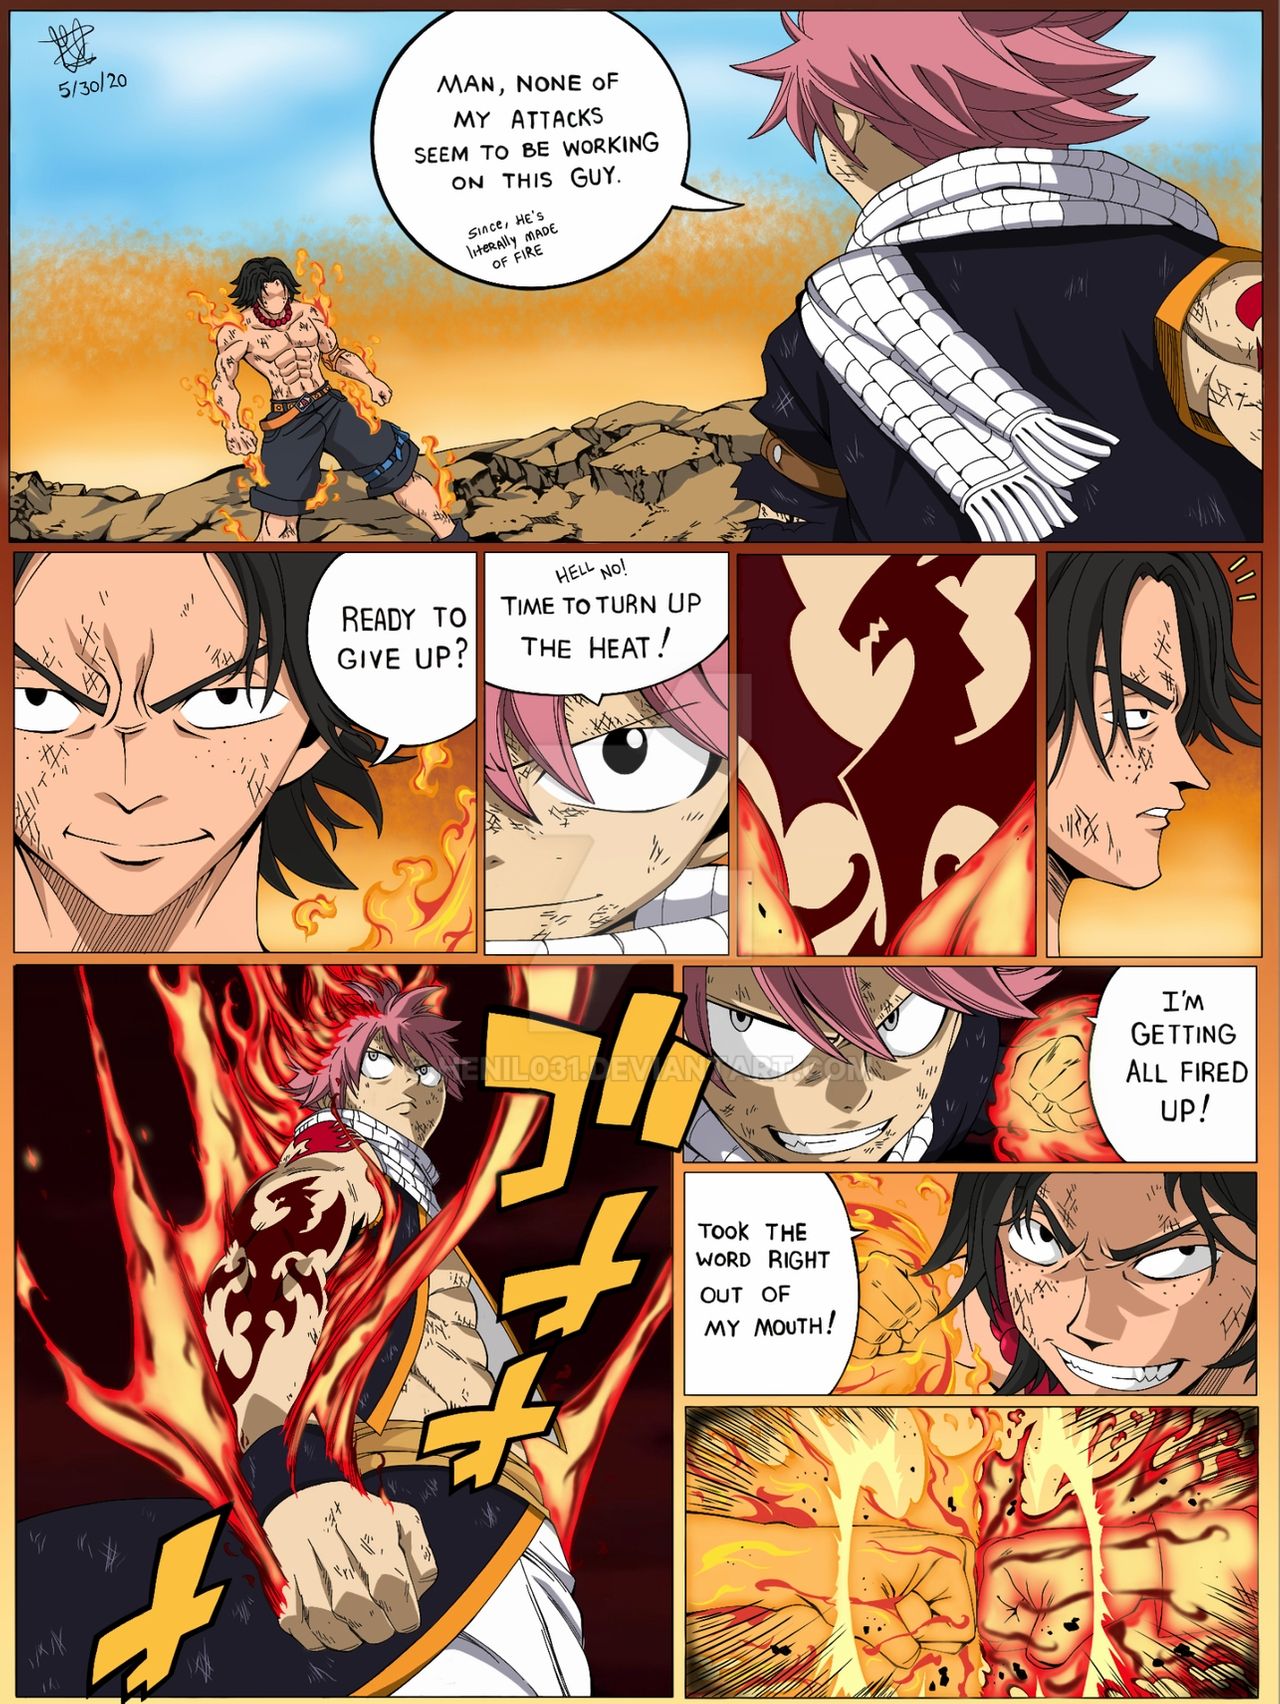 2boys bare_shoulders black_hair clash clenched_hands crossover fairy_tail fighting fire freckles glowing glowing_fist grin hat henil031 highres jewelry multiple_boys natsu_dragneel necklace one_piece pink_hair portgas_d_ace scarf shirtless smile speech_bubble spiky_hair straw_hat tattoo watermark